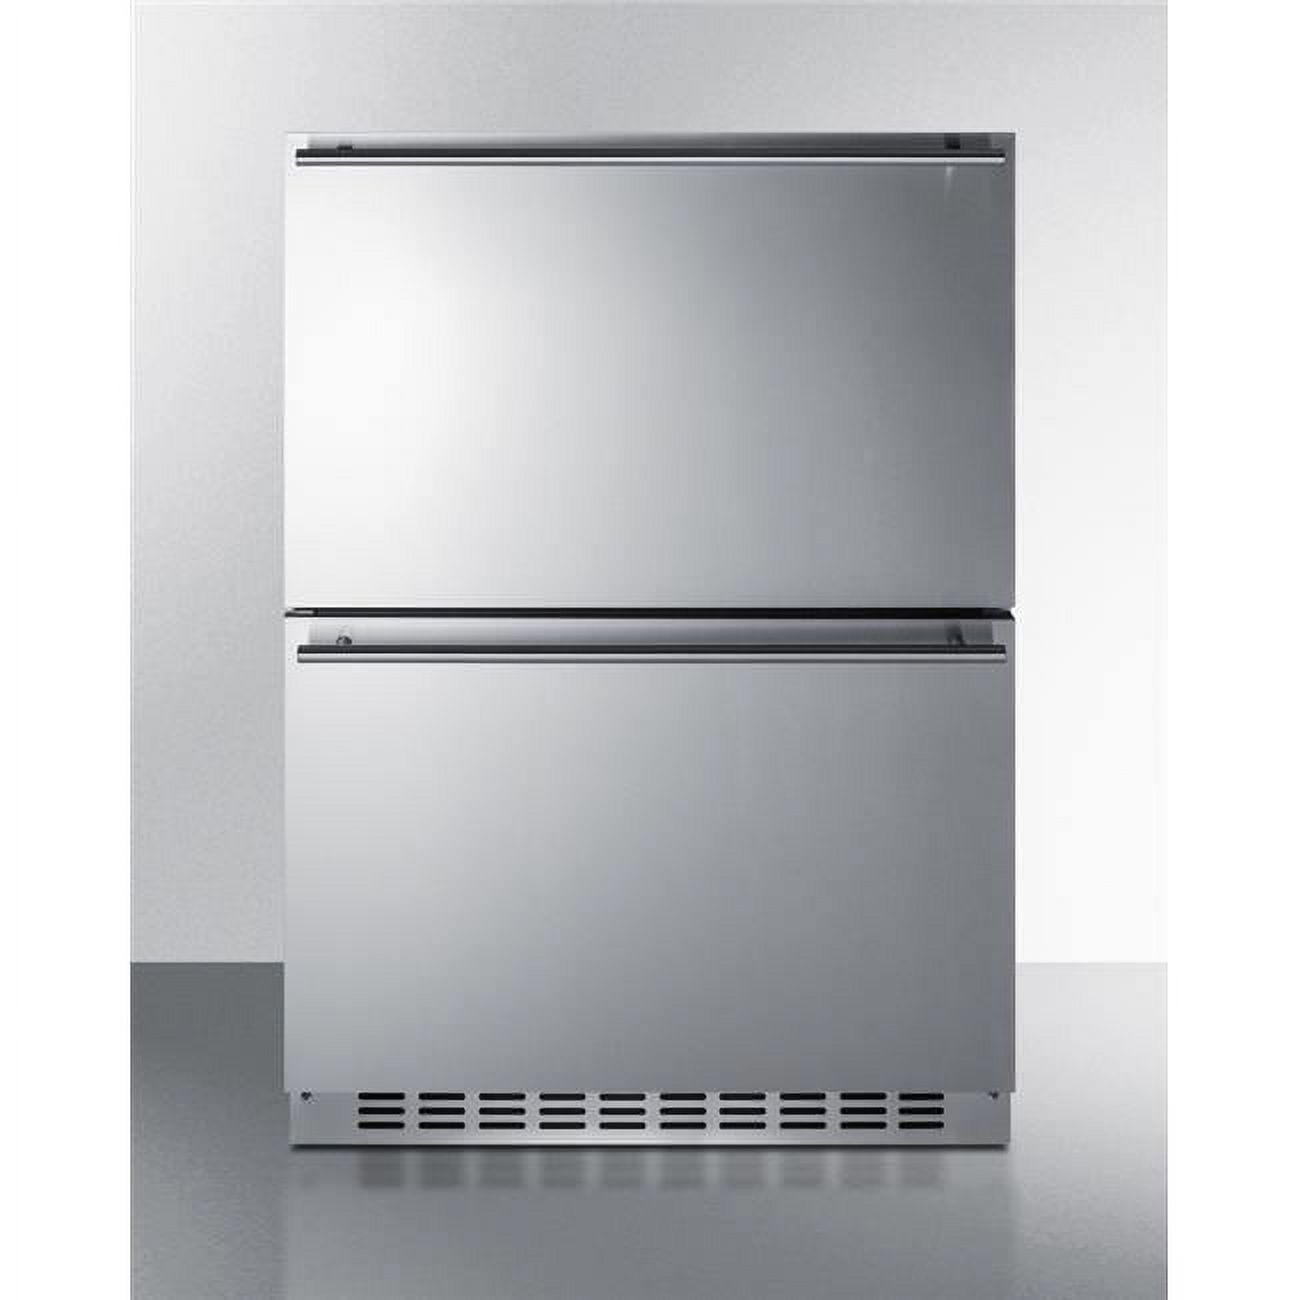 Summit Appliance SPRF34D 24 in. Wide 2-Drawer Refrigerator-Freezer, Stainless Steel - image 1 of 15